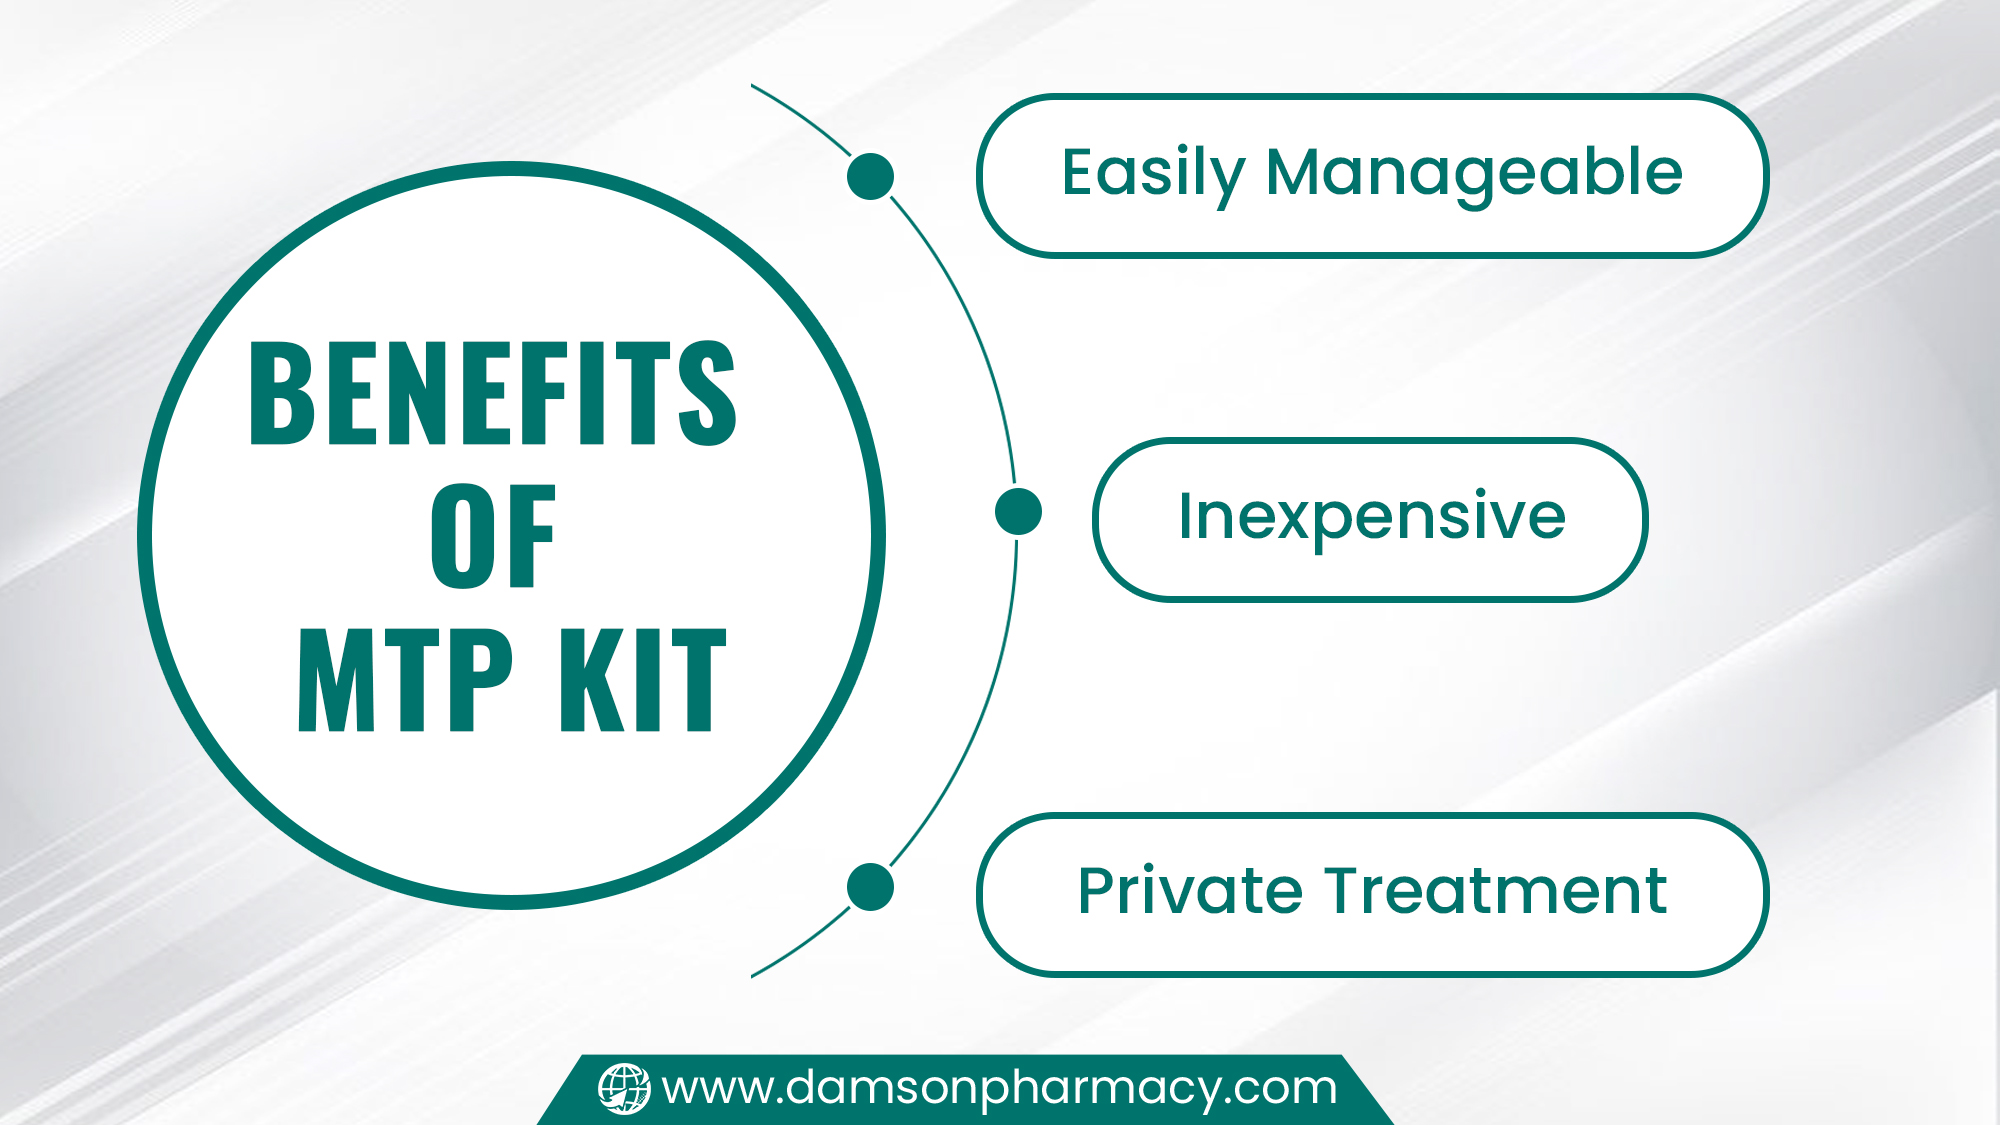 Benefits of the MTP Kit